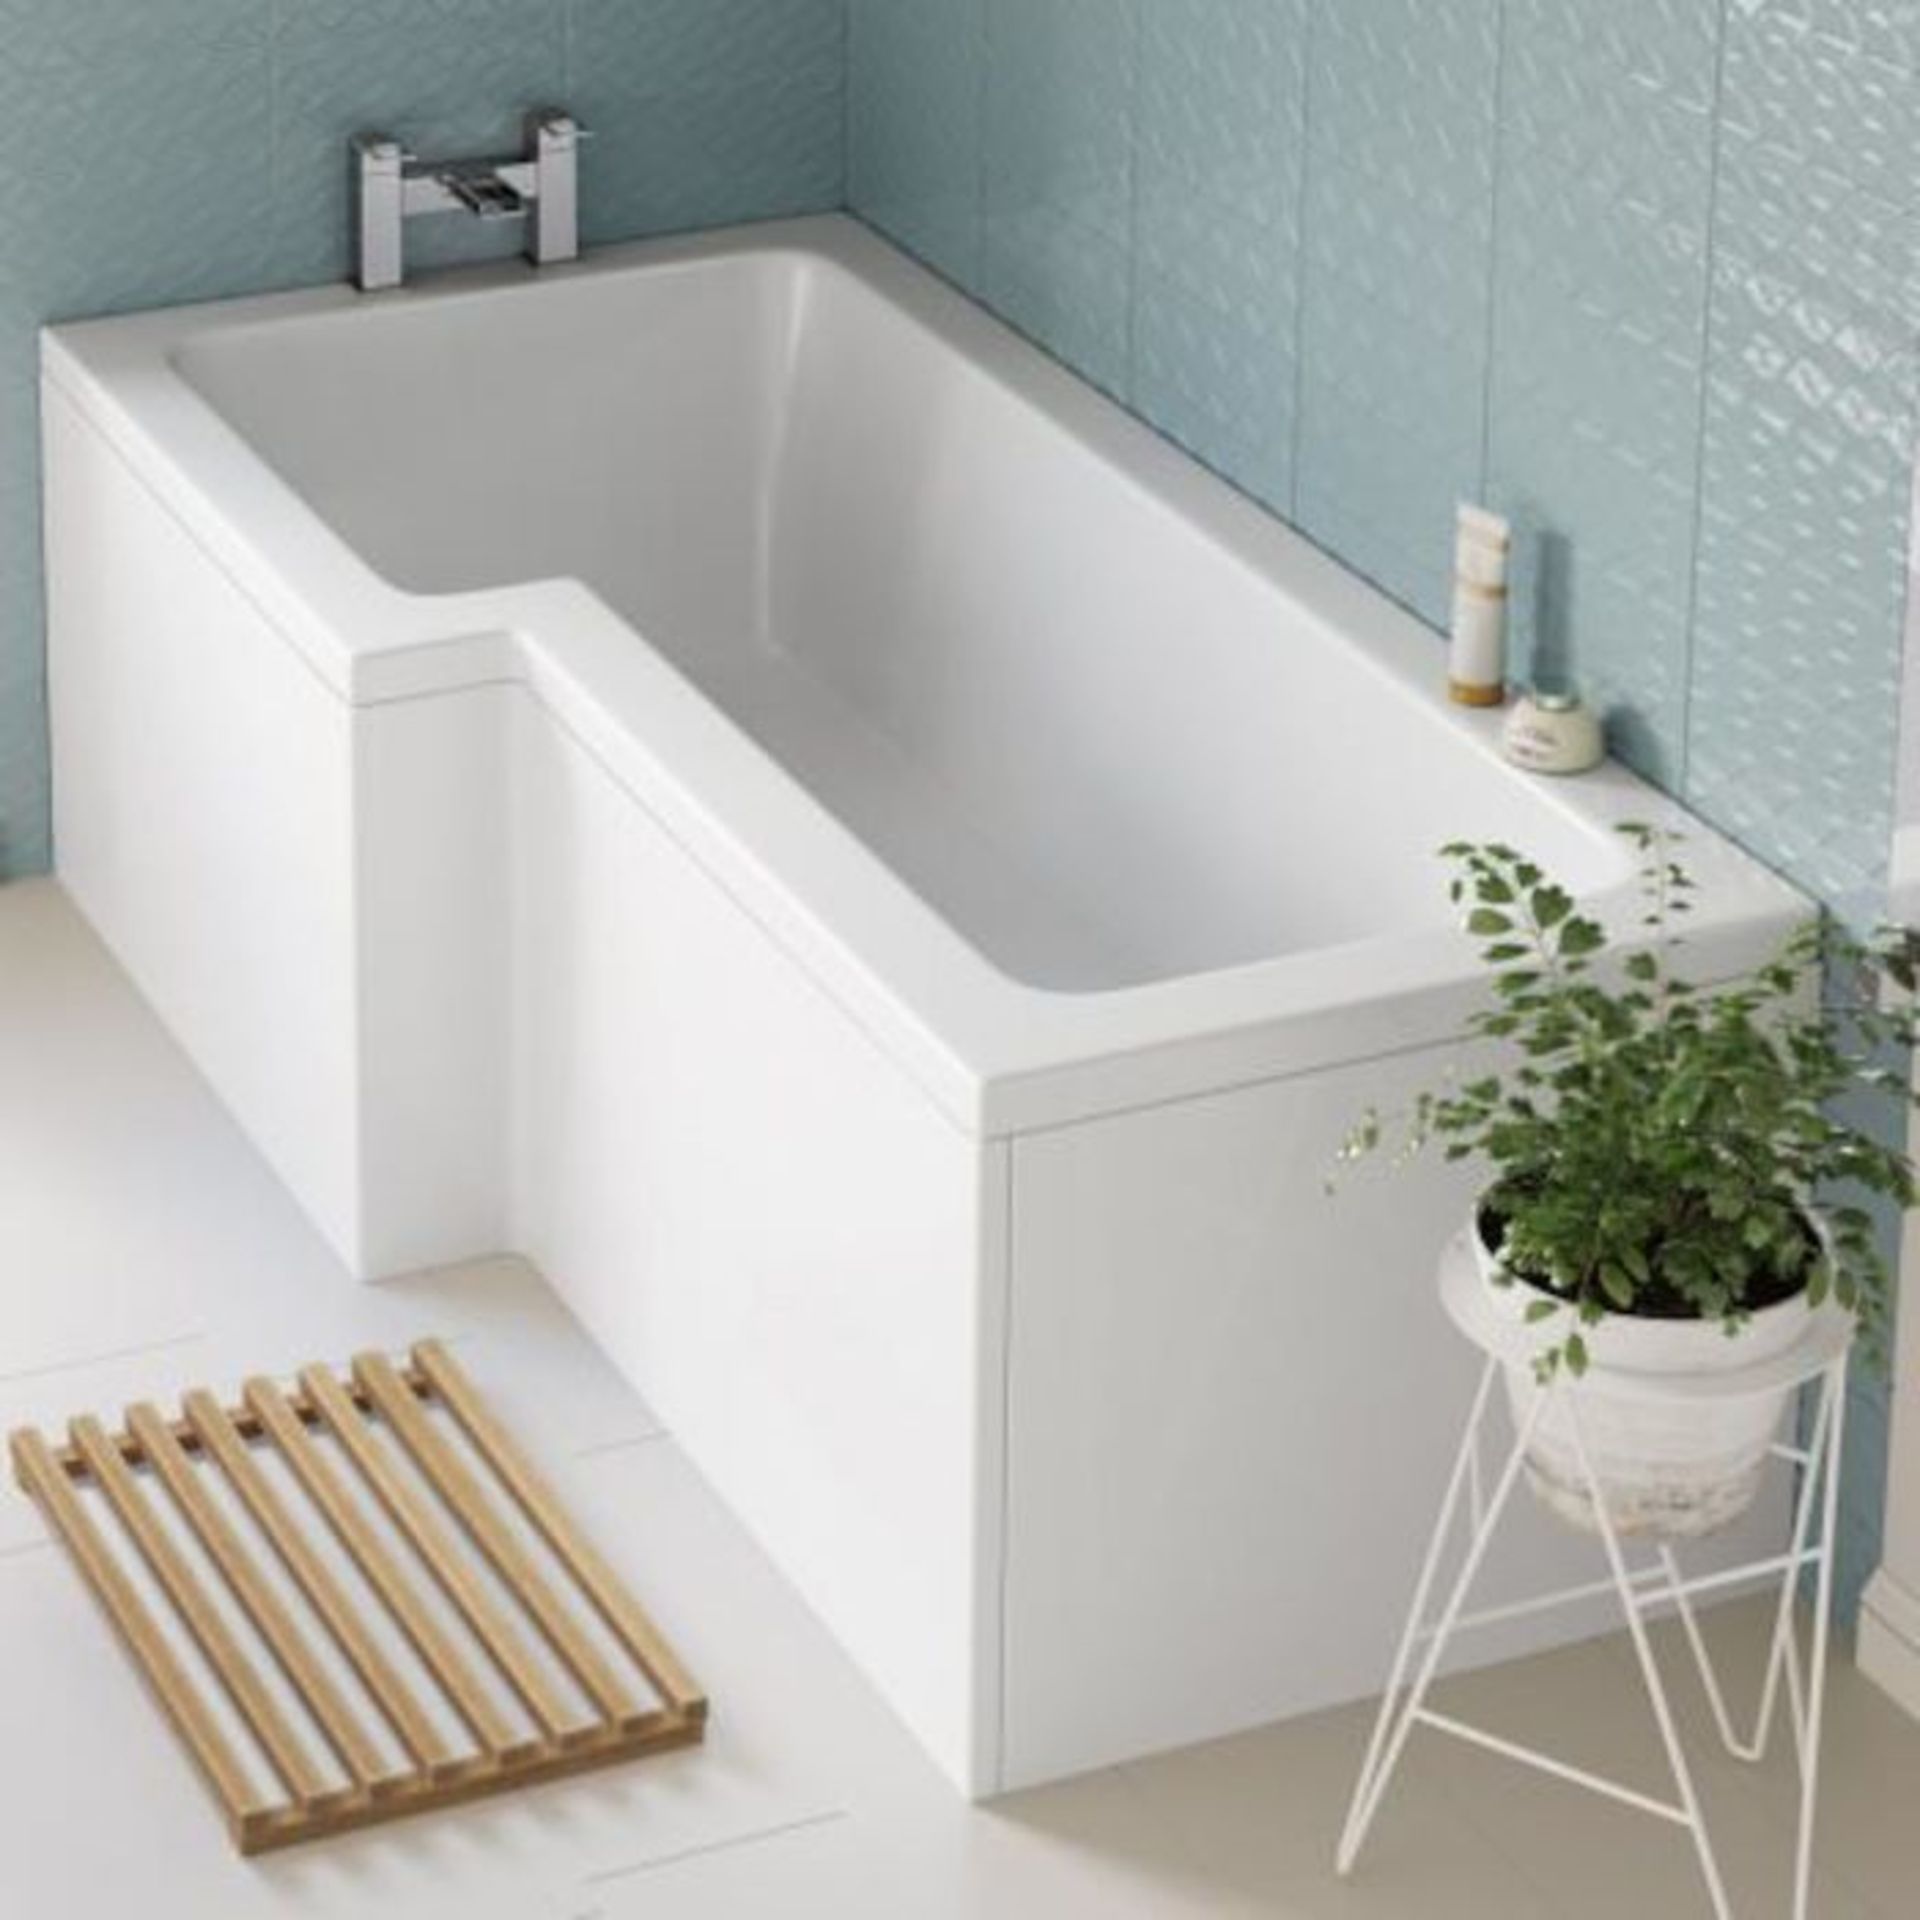 (G69) 1700x850mm Left Hand L-Shaped Bath. RRP £349.99. Constructed from high quality acrylic Length: